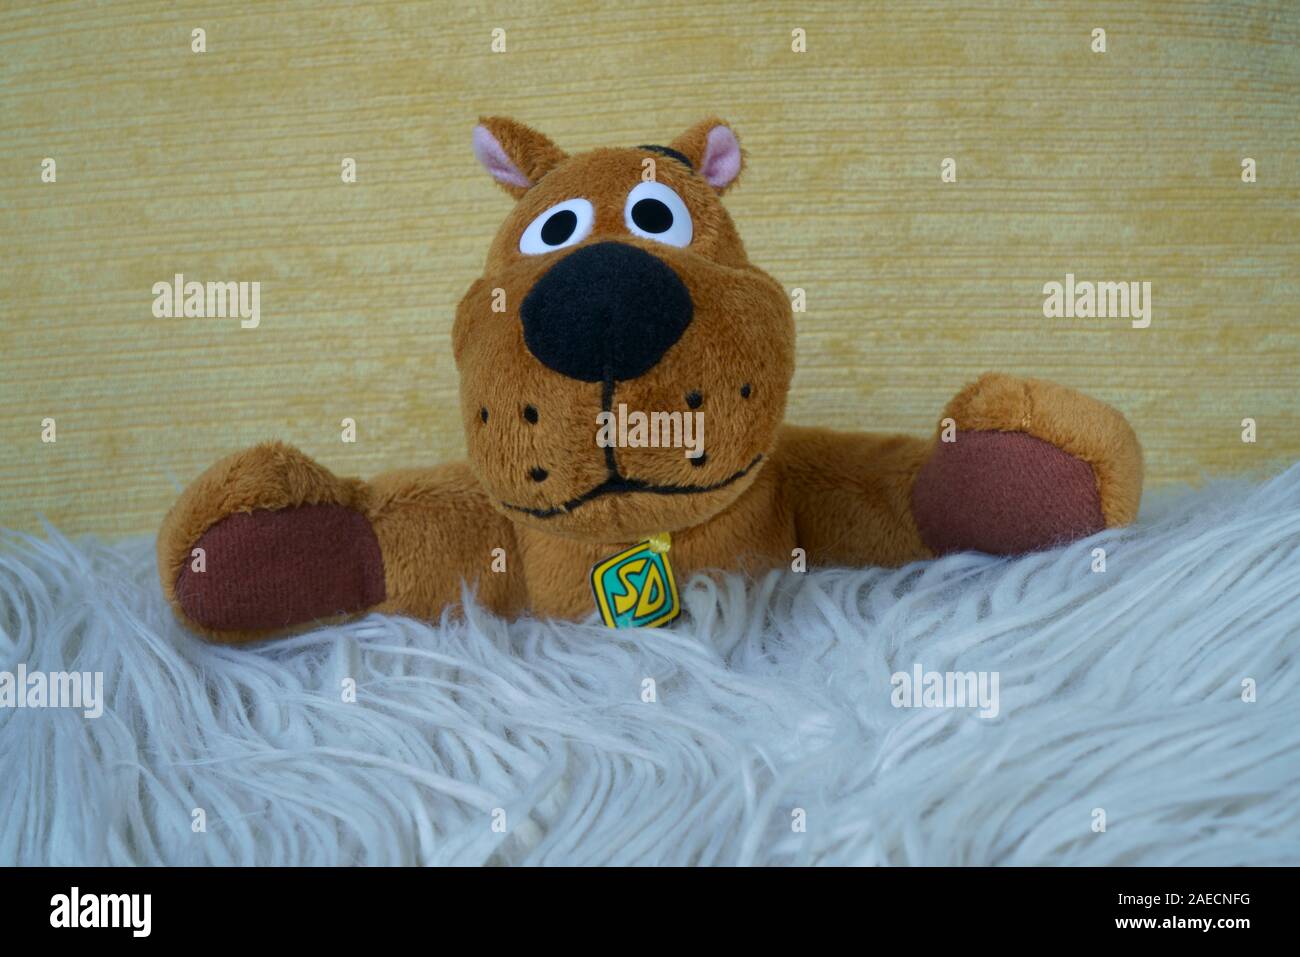 scooby doo cuddly toy